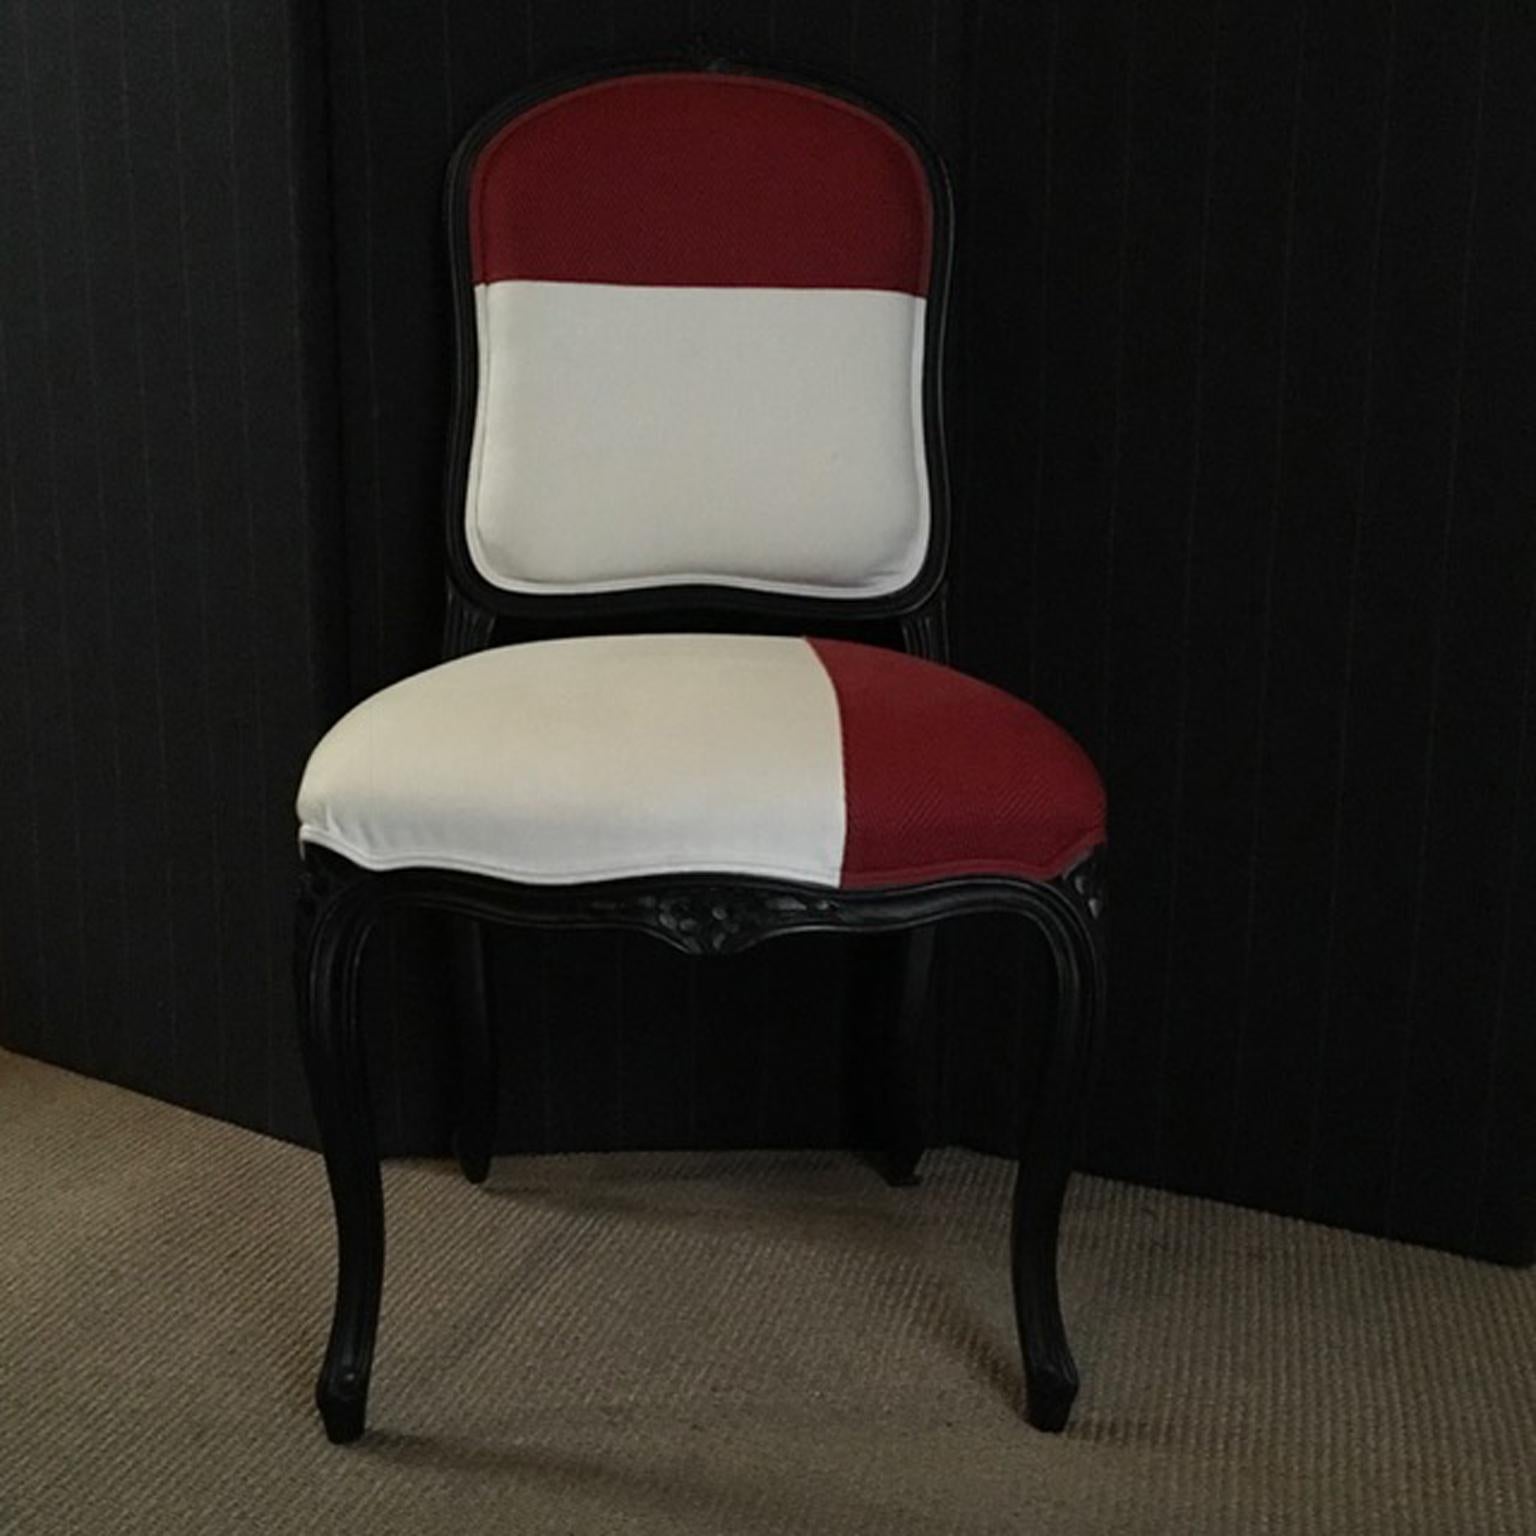 French Provincial Lacquered Black Wood Dining Chair Upholstered Red and White For Sale 5